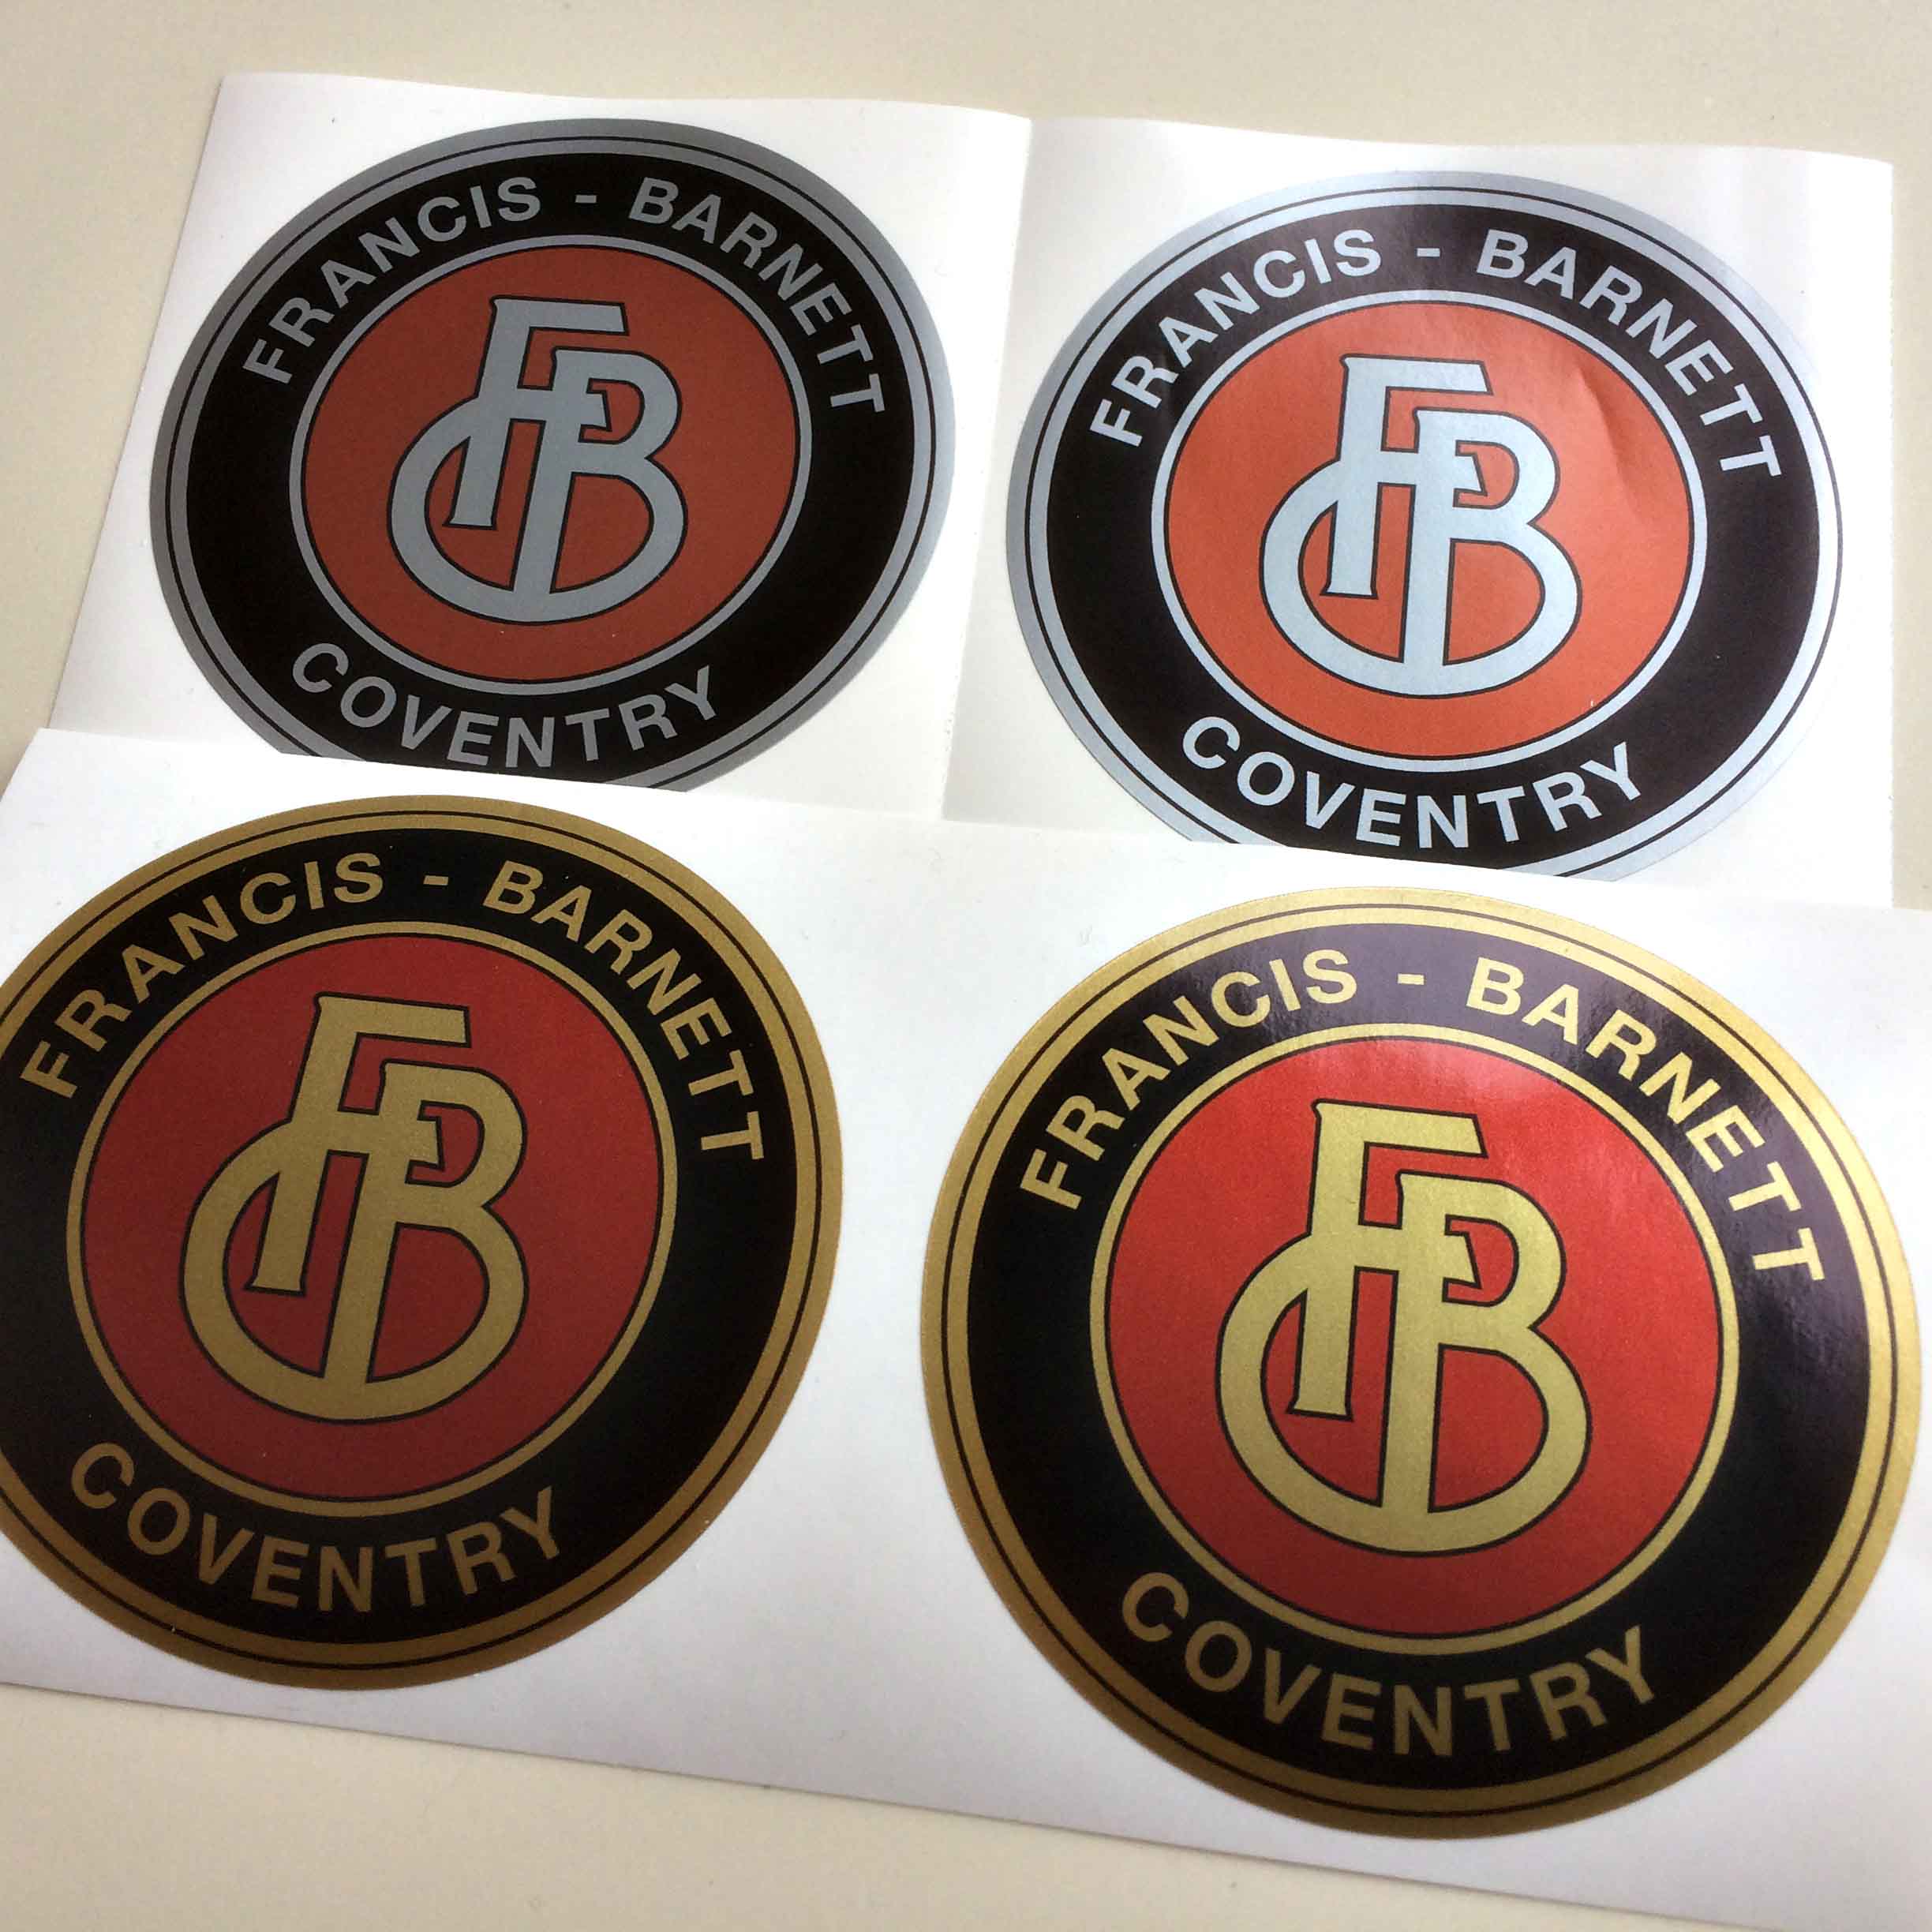 Francis - Barnett Coventry in gold or silver lettering surrounds a black circle with a gold or silver border. In the centre on a red circle are the initials FBC in gold or silver.